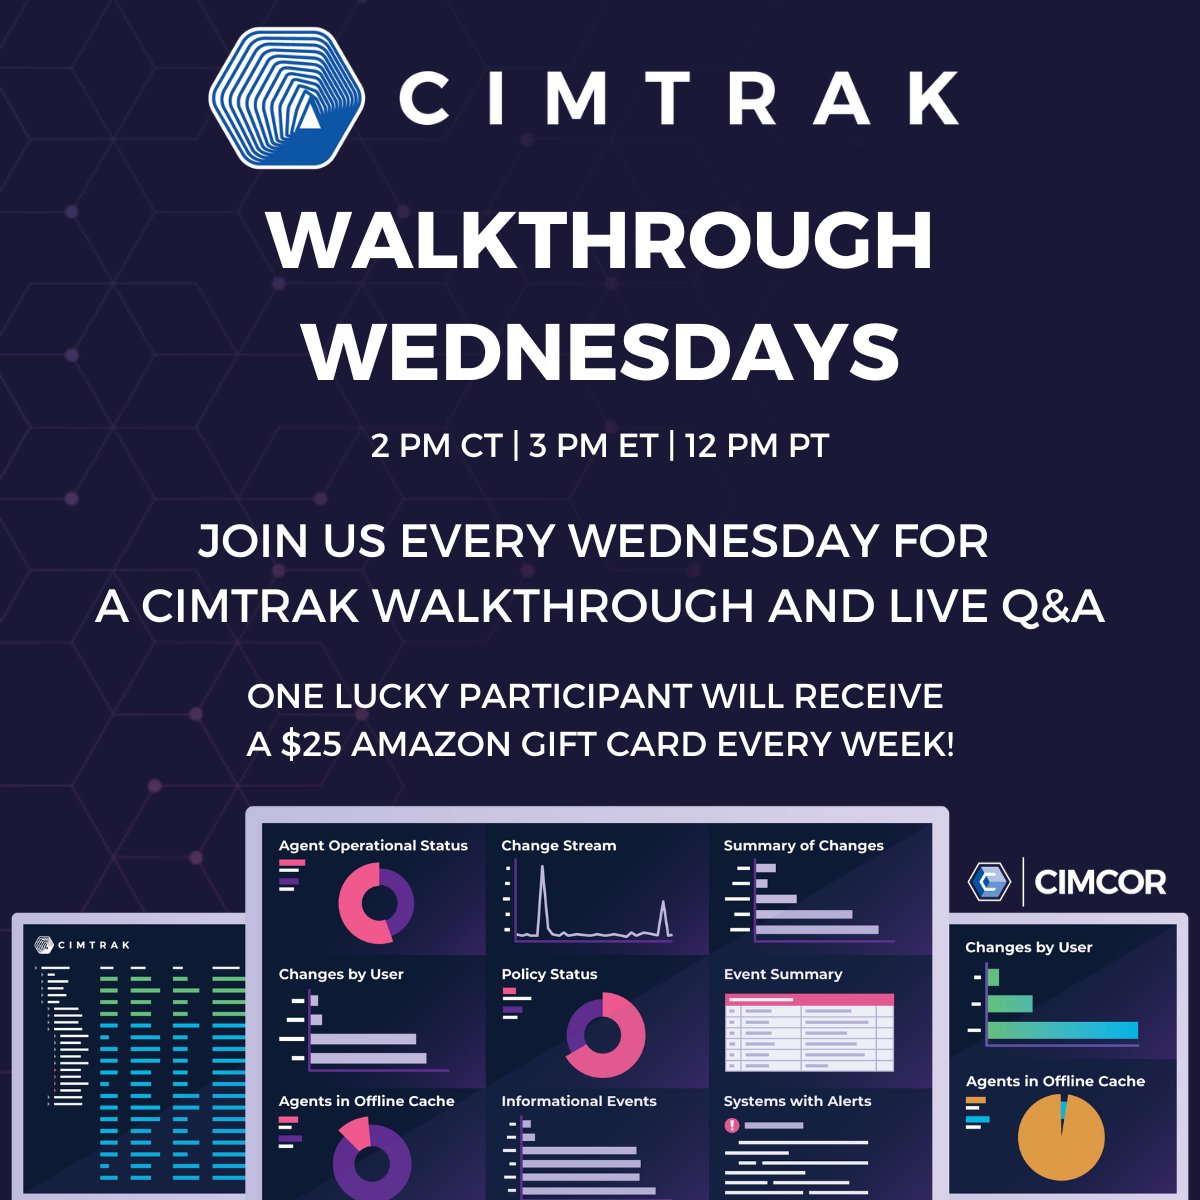 T-2 hours until this week's Walkthrough Wednesday! ⏳It's not too late to join - secure your spot now! ⬇️ hubs.la/Q02t9bg30 #WalkthroughWednesday #CimTrak #FileIntegrityMonitoring #Cybersecurity #Infosec